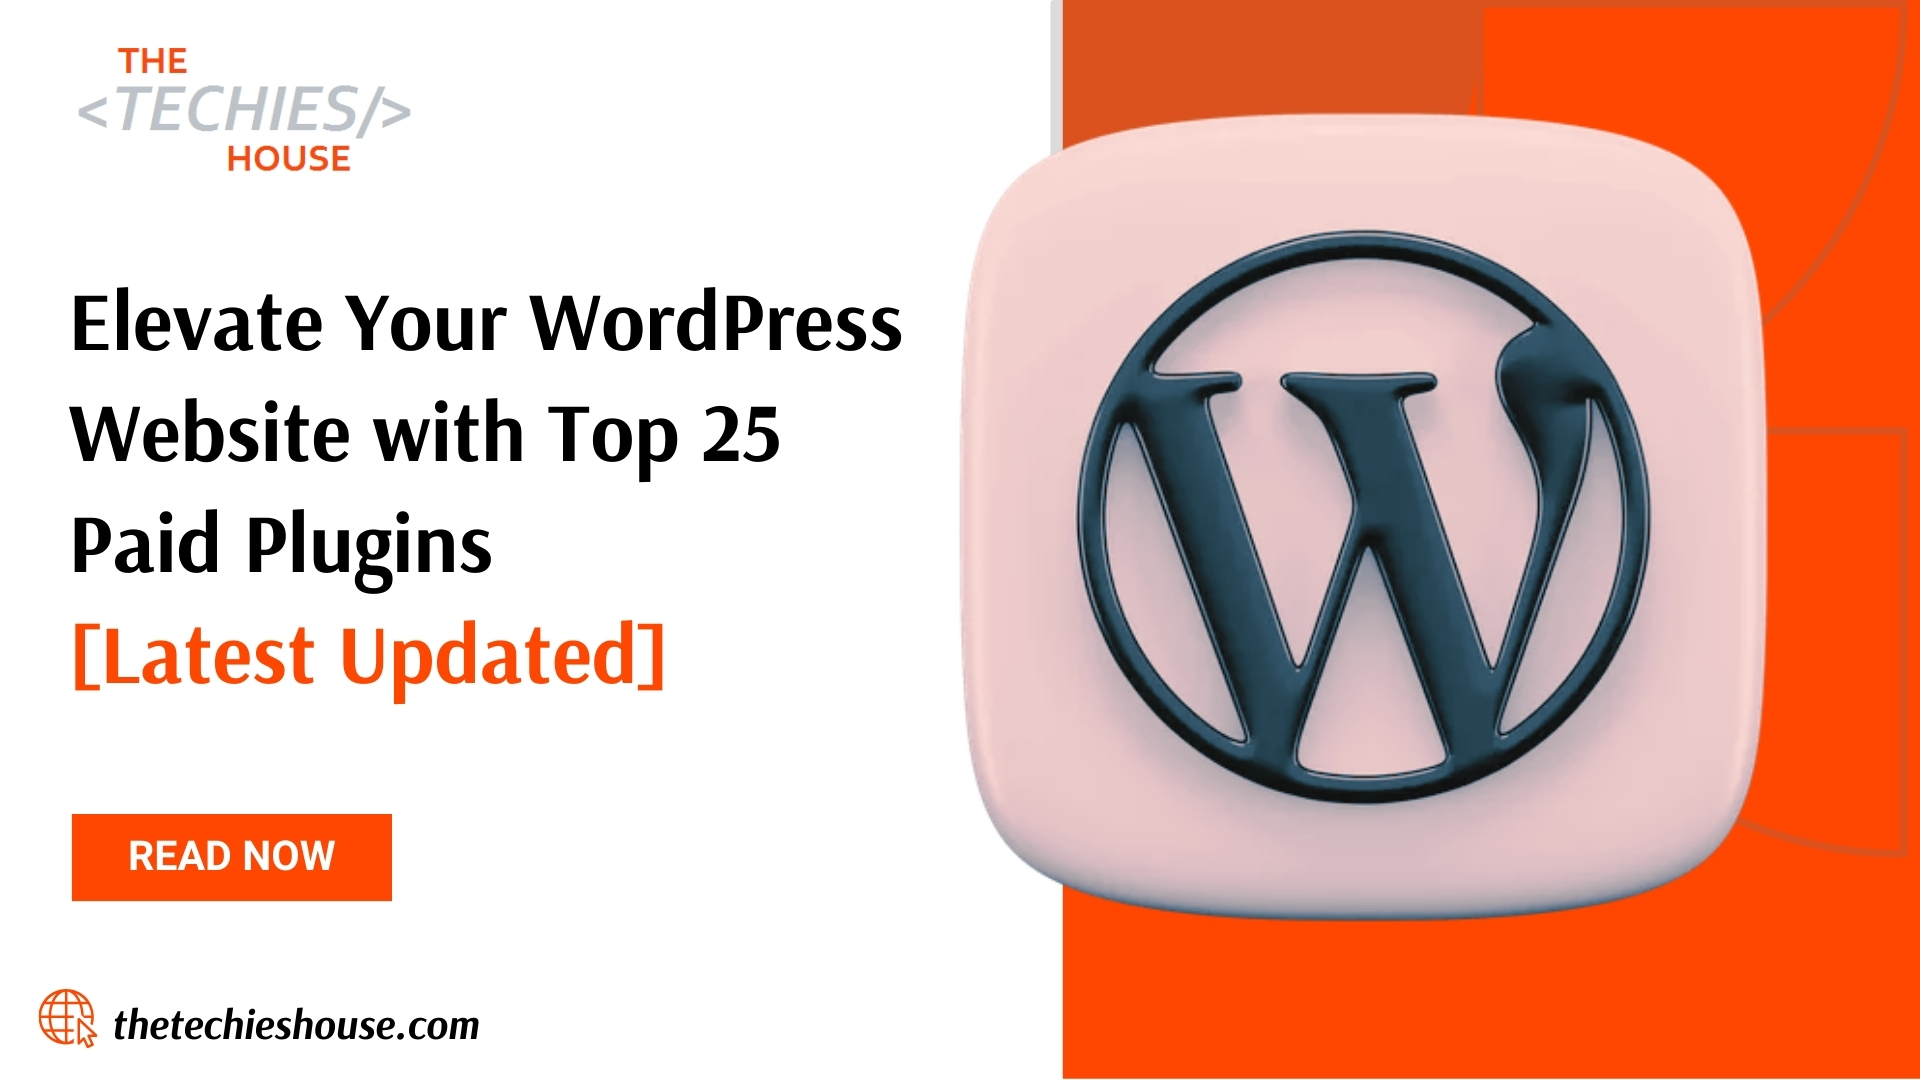 Elevate Your WordPress Website with Top 25 Paid Plugins [Latest Updated]